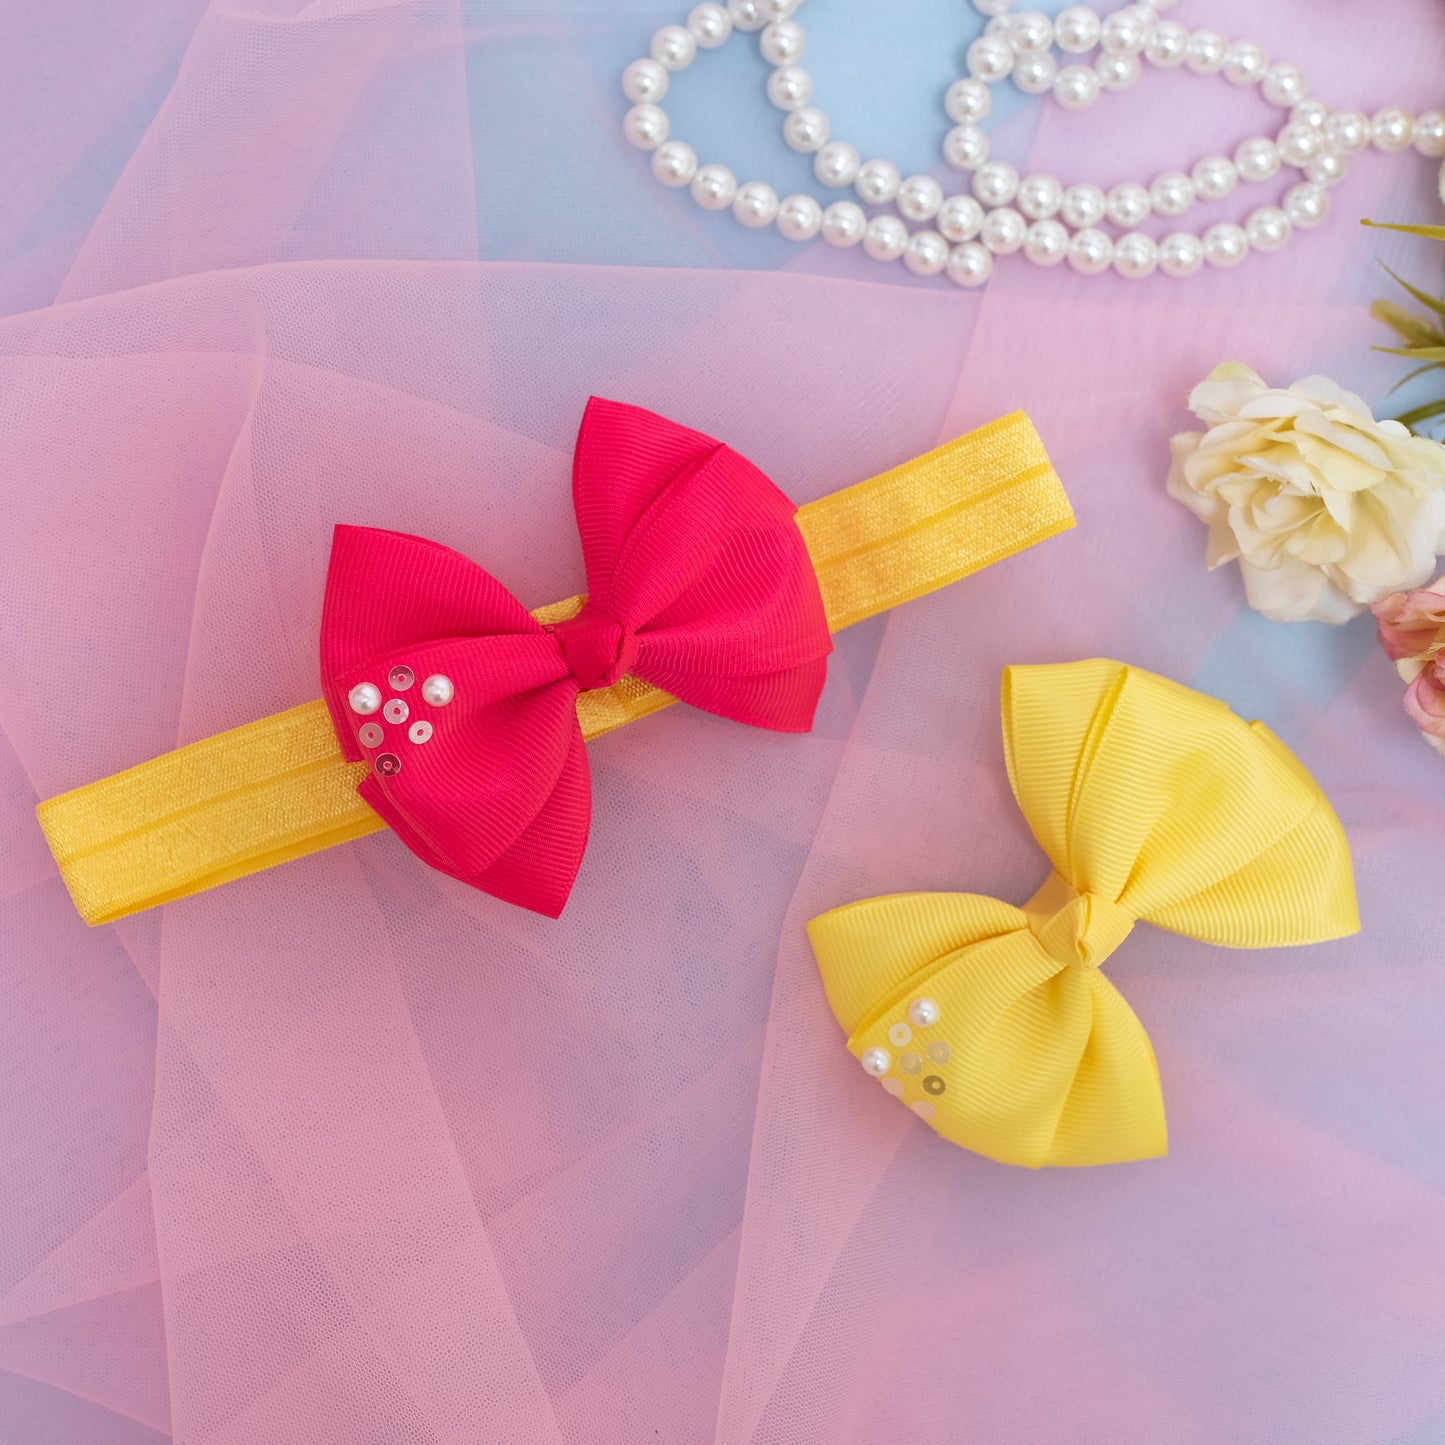 Combo: 1 Stretchy Band with 2 Layered Bows embellished with Sequinze and Pearls - Yellow, Hot Pink